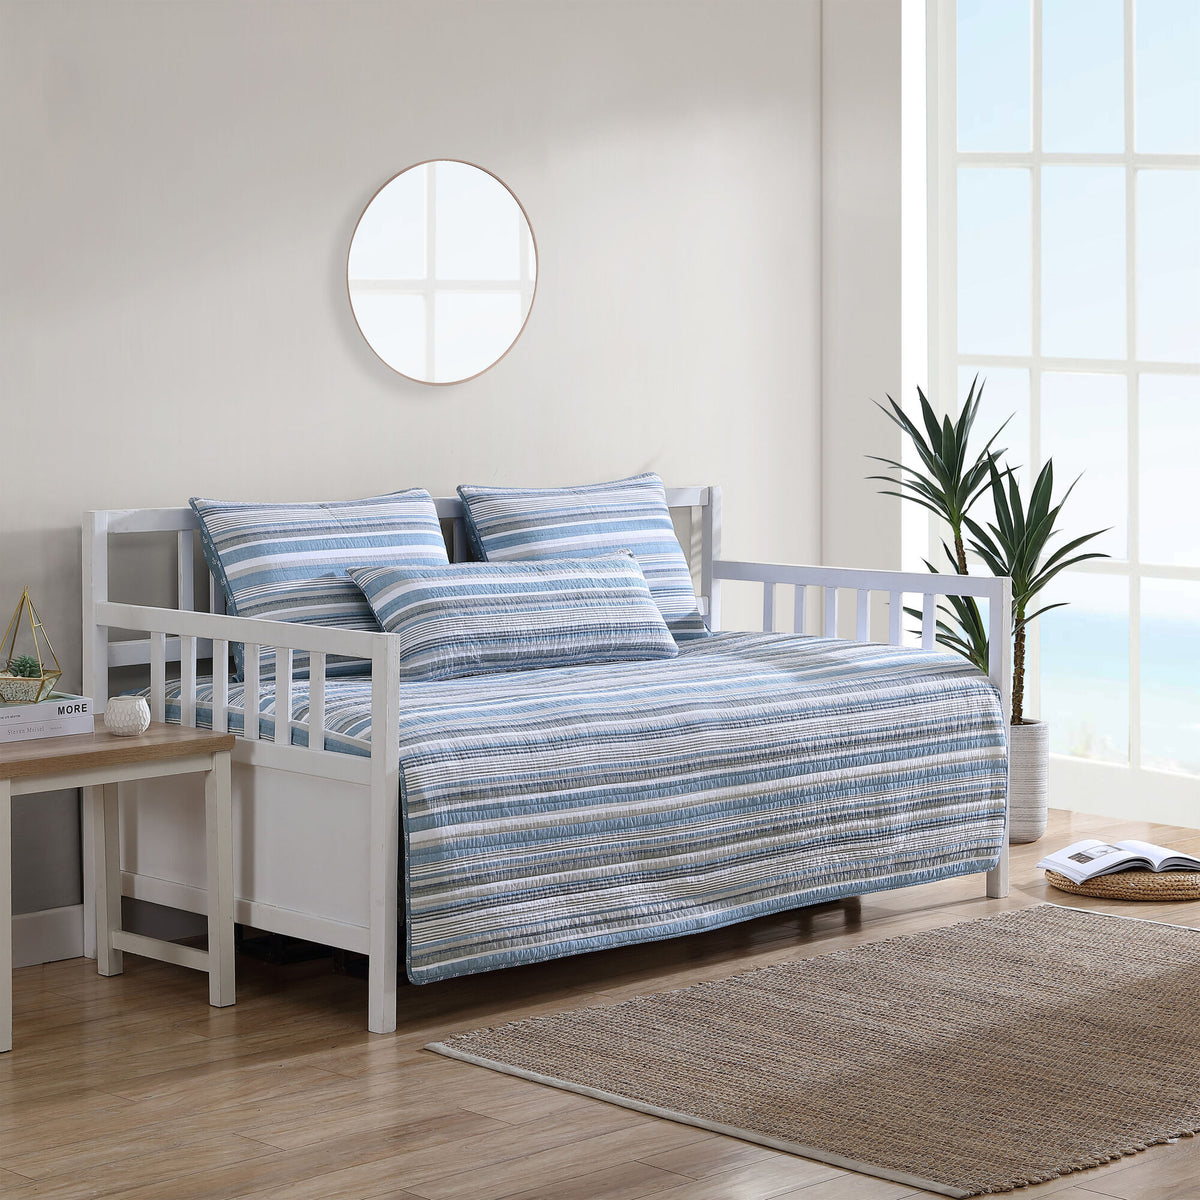 Nautica Jettison Daybed Quilt And Sham Set Smoke